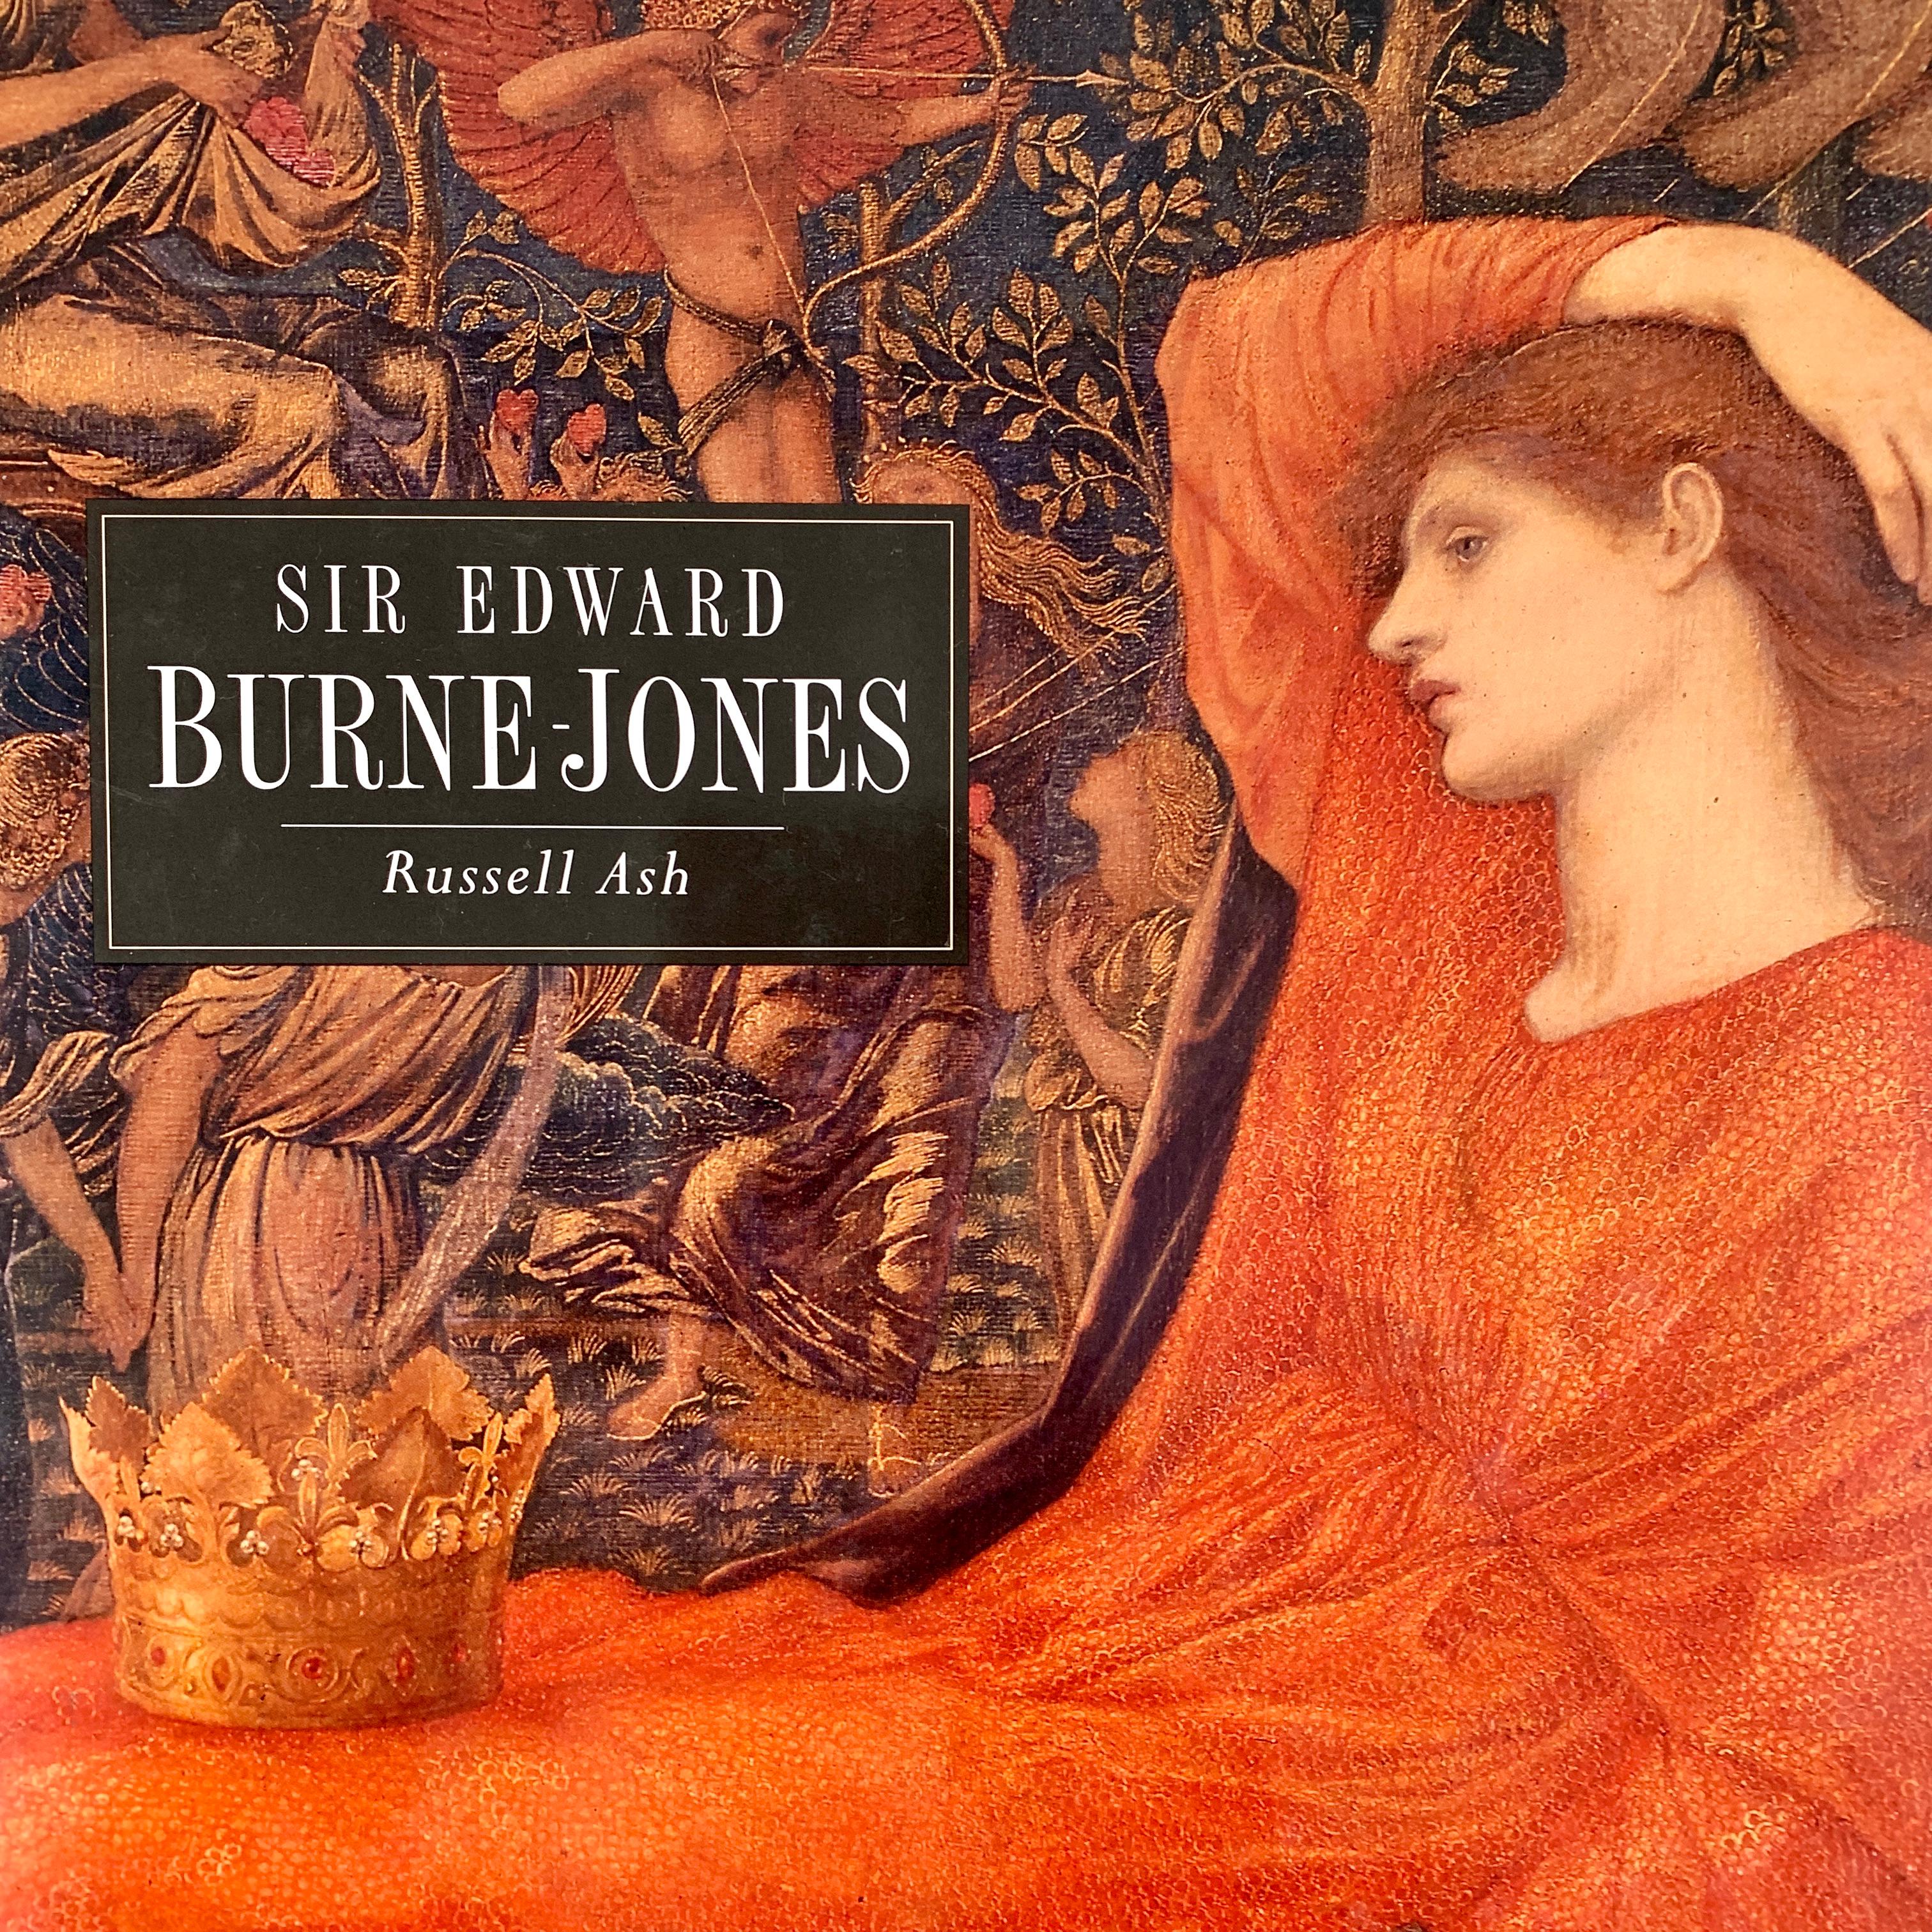 Burne-Jones, the Pre-Raphaelite painter and leader of the Aesthetic Movement is celebrated in this biographical, art and reference title that reproduces many of his works. Burne-Jones is one of the founding fathers of Pre-Raphaelitism – 70